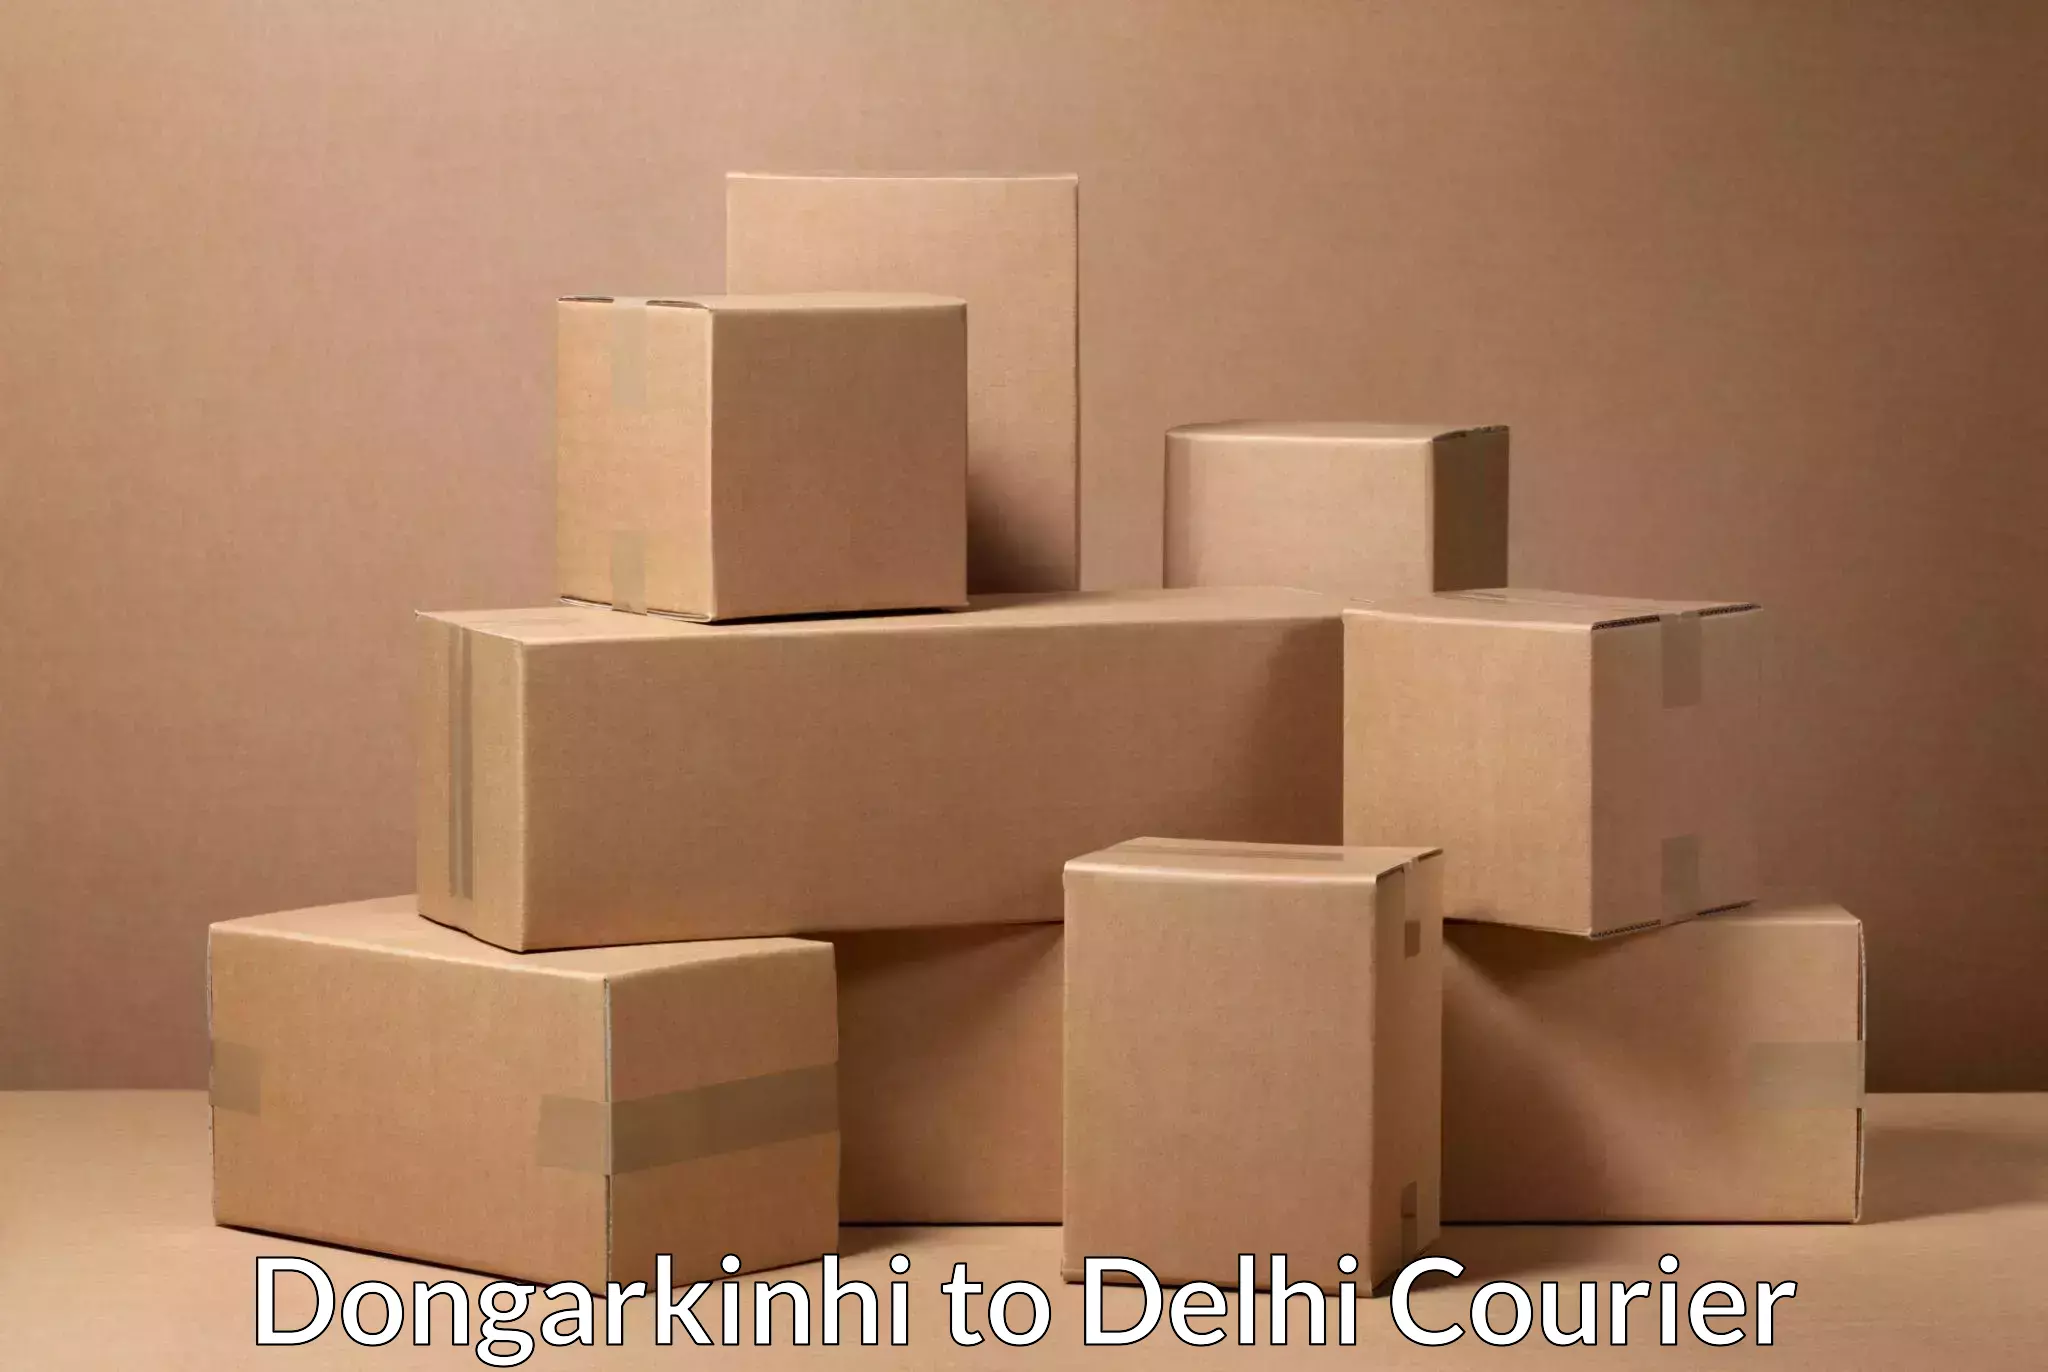 Cargo delivery service Dongarkinhi to East Delhi